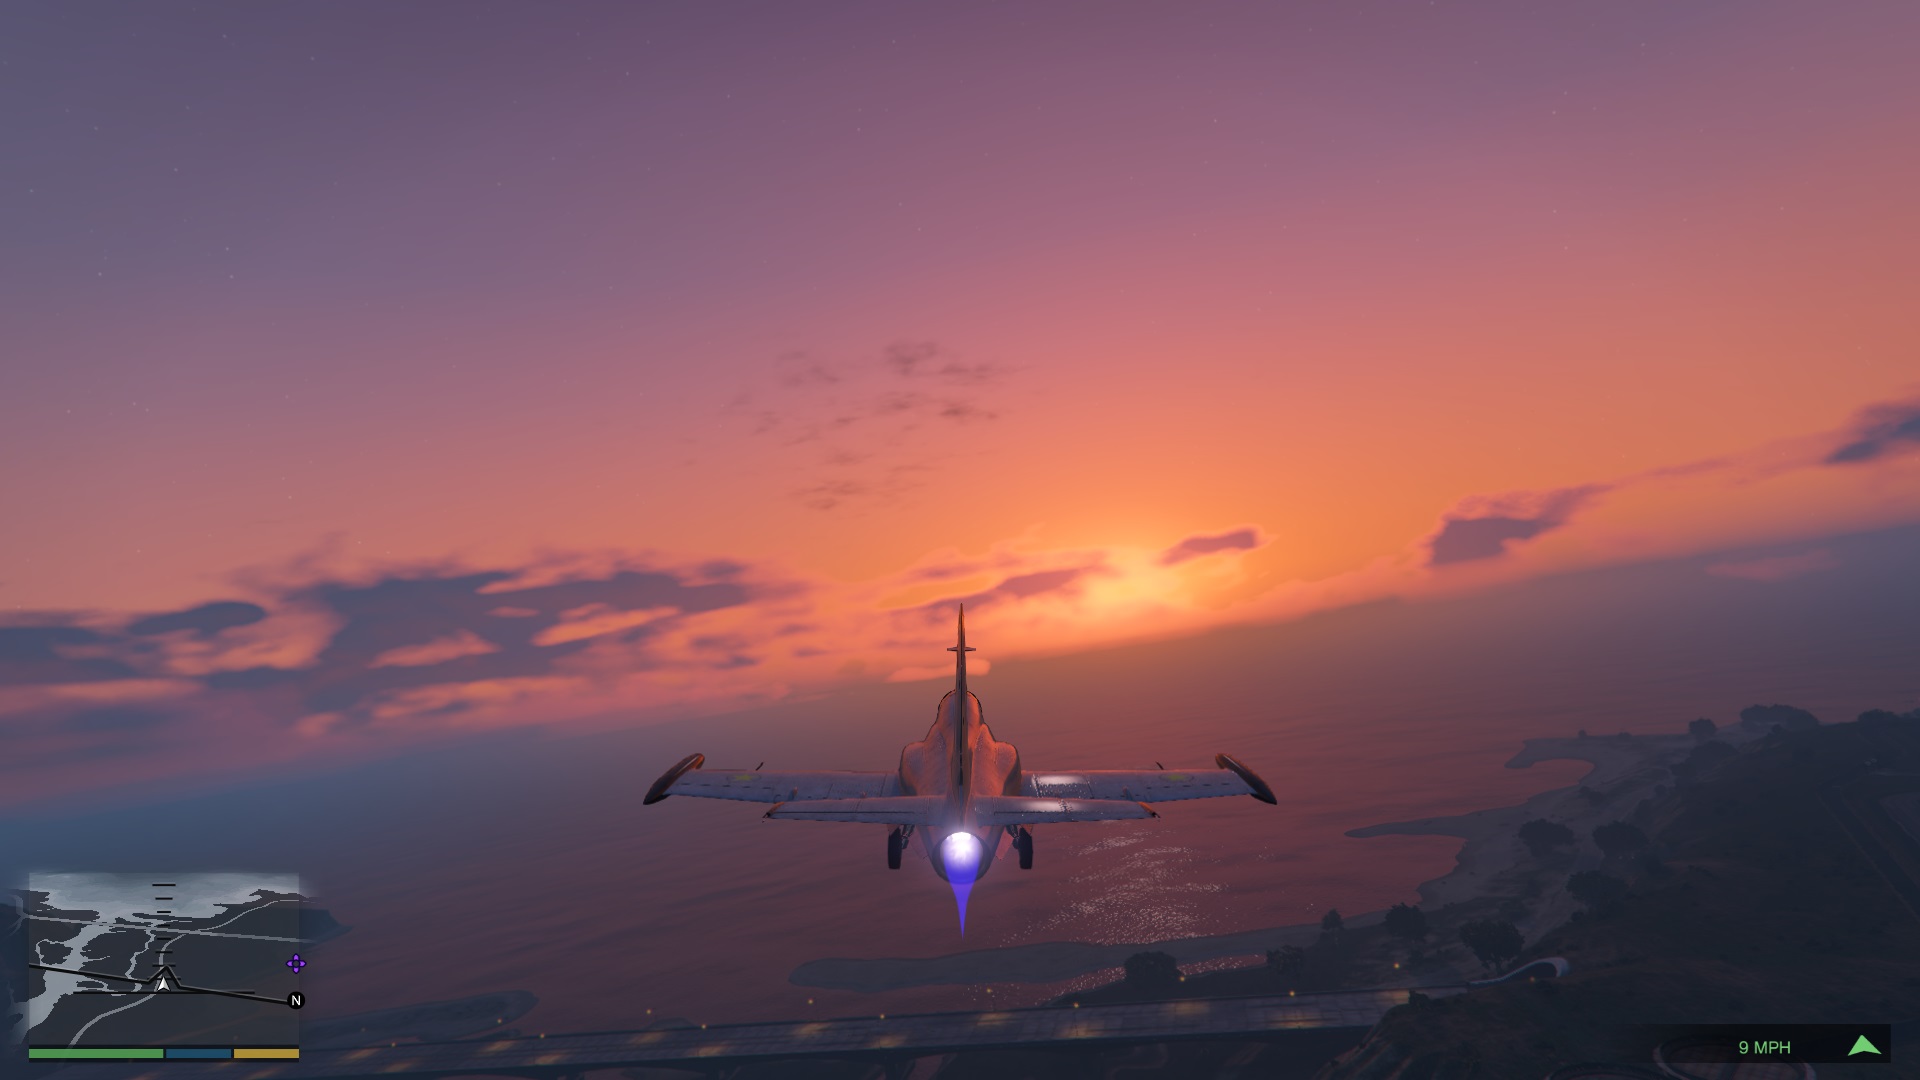 How To Get a Jet in GTA 5